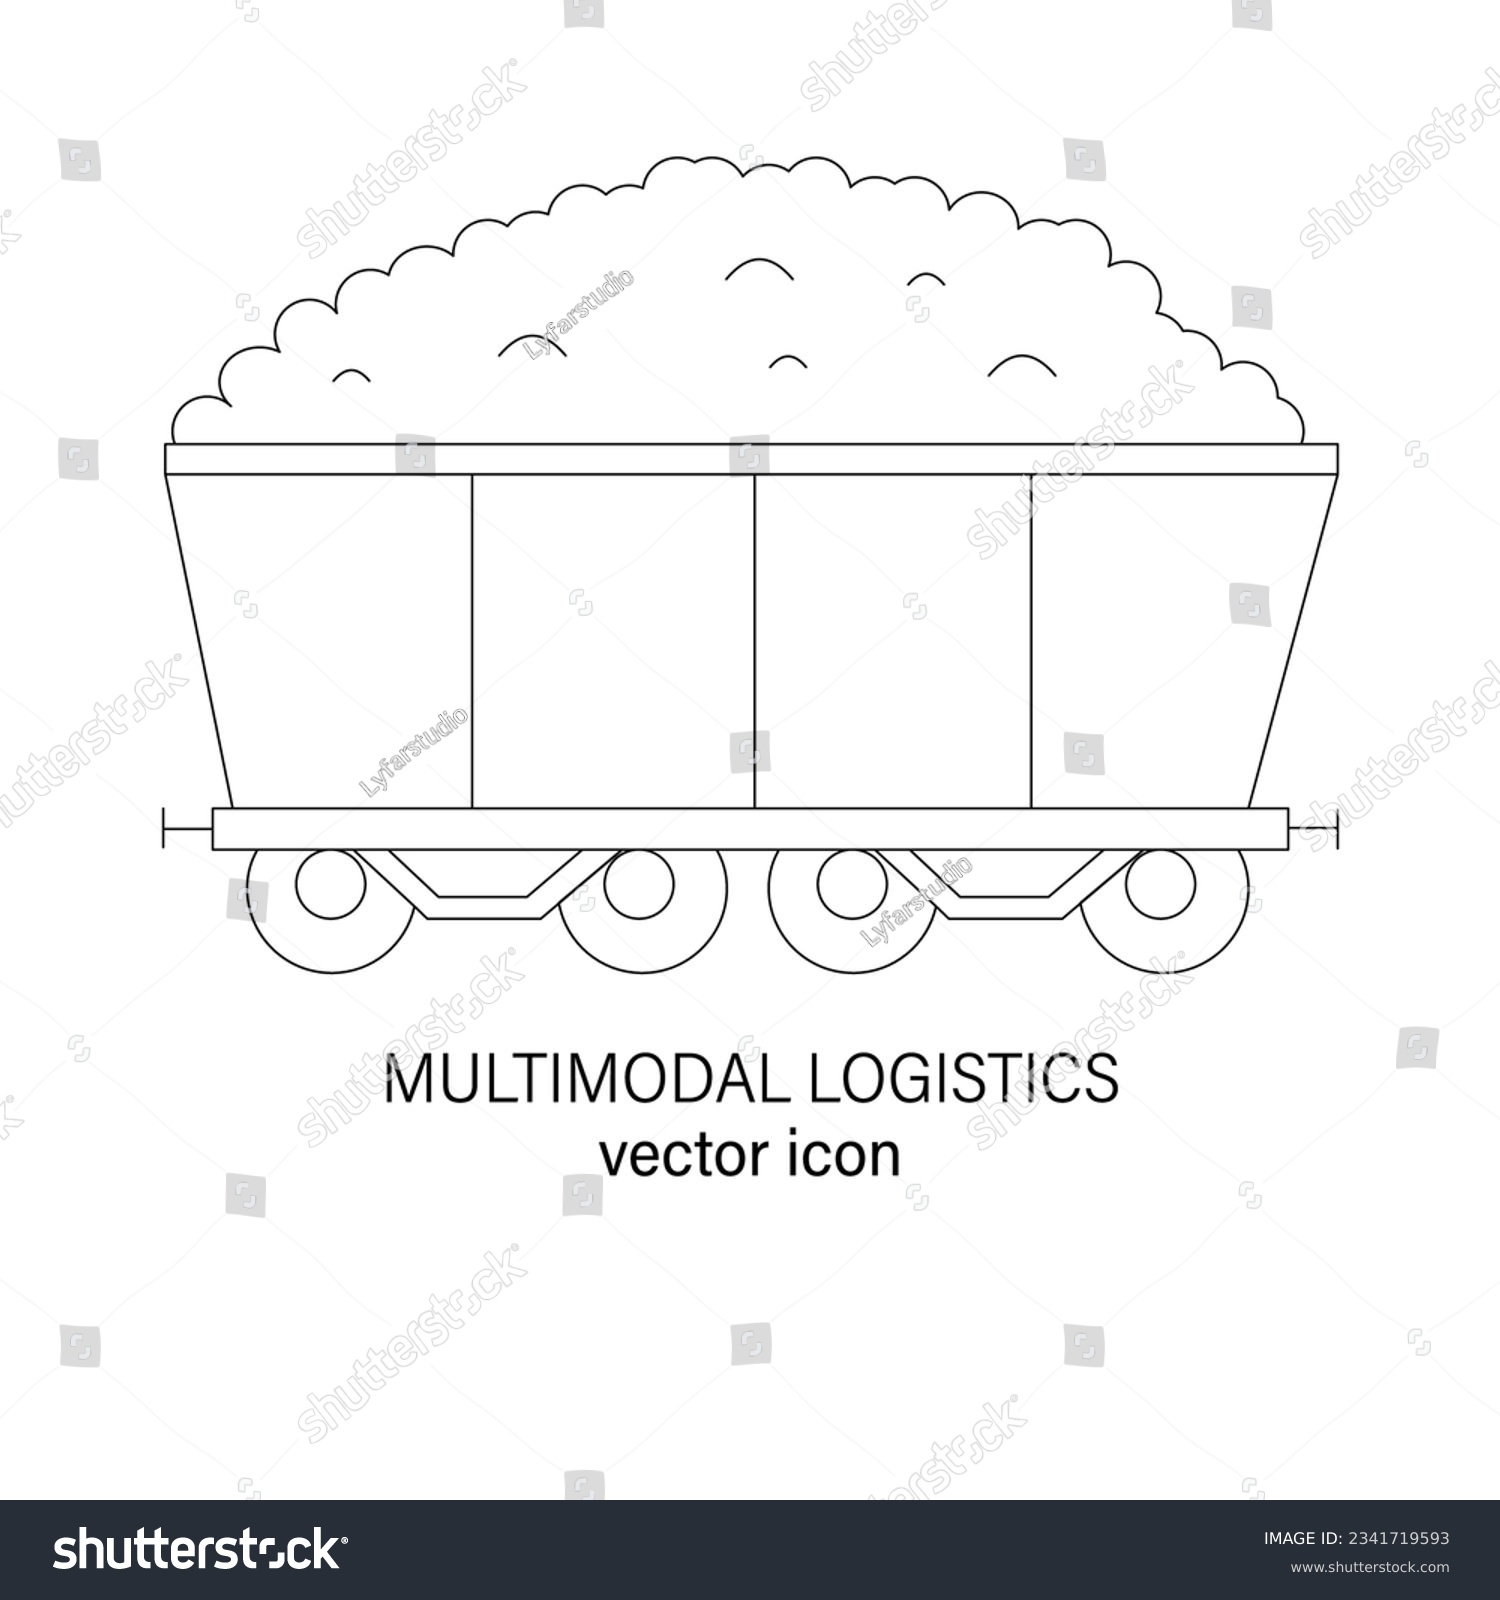 SVG of Railway or multimodal logistics line editable icon, vector pictogram of train. Illustration of open top wagon for bulk or loose wares transportation, rail freight transport, carriage of goods svg